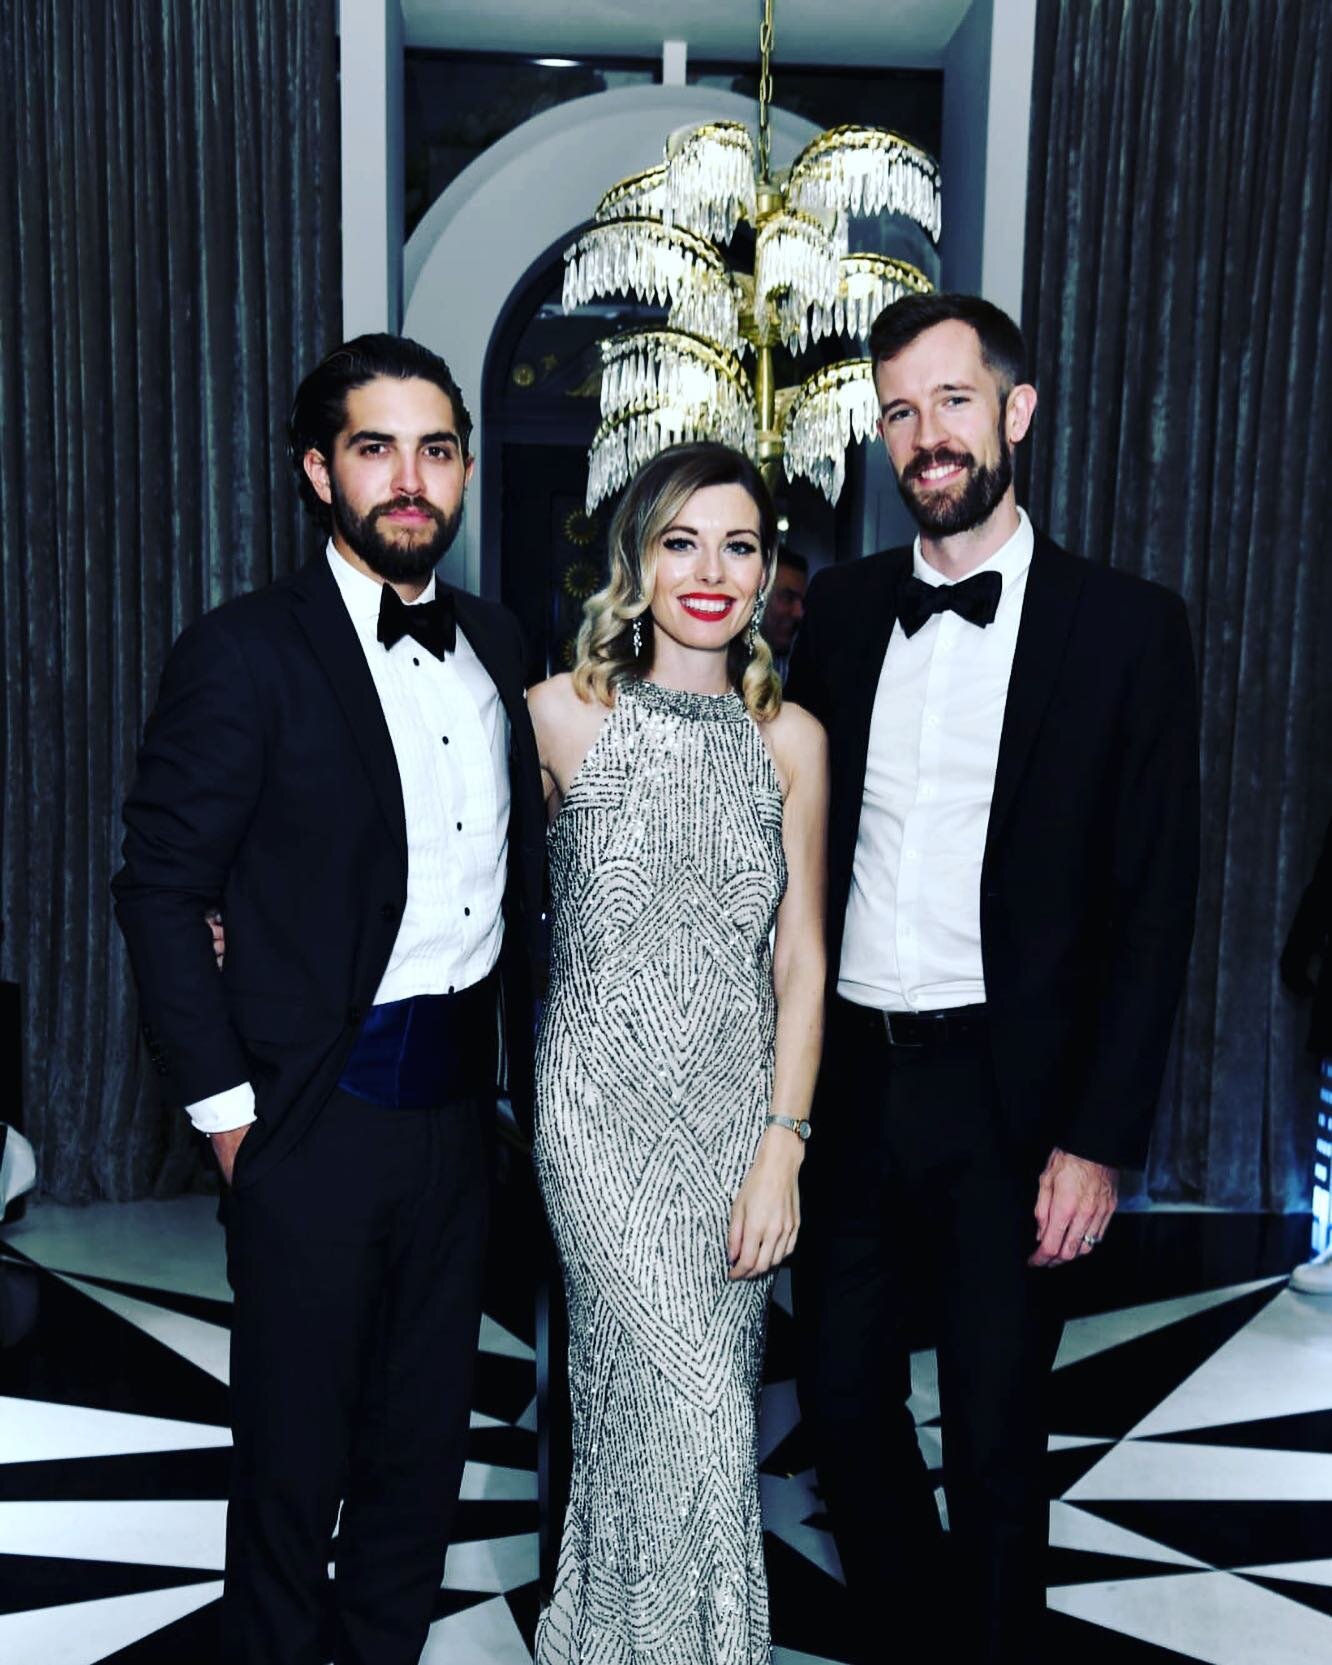 Here&rsquo;s a snap of one of our newest acts &ldquo;The Goodwins&rdquo; performing at @harrywinston recently 💍👑🎙